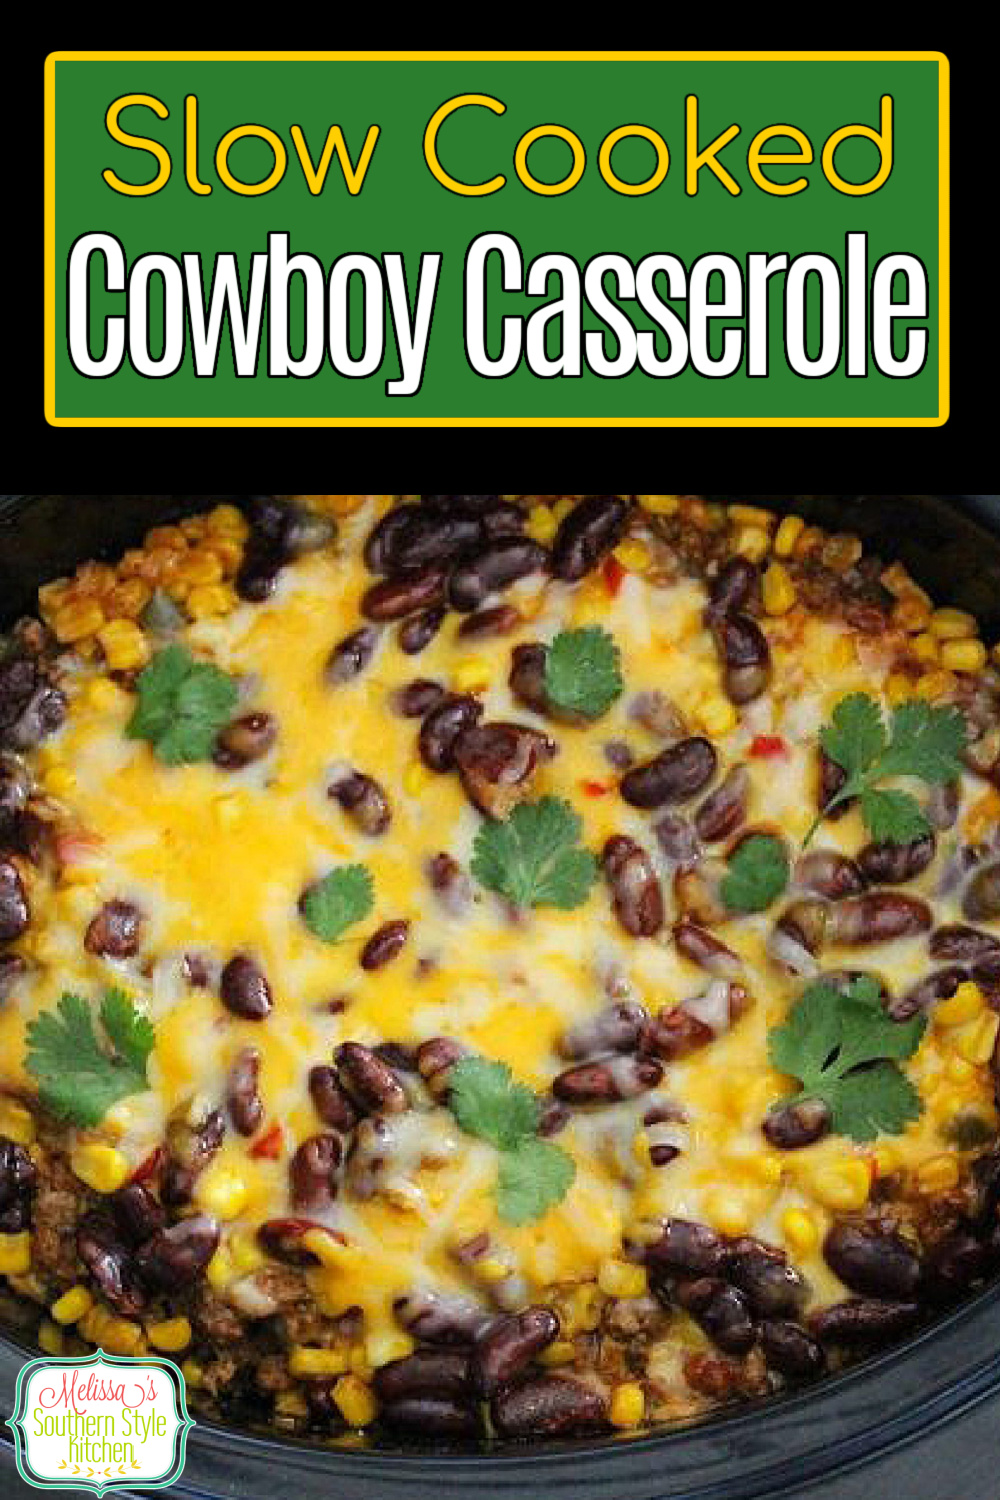 This Slow Cooked Kickin' Cowboy Casserole makes a mouthwatering one pot meal guaranteed to satisfy at the end of a hectic day #slowcookercowboycasserole #casseroles #casserolerecipes #easygroundbeefrecipes #slowcookerrecipes #crockpotcowboycasserole #easycasseroles via @melissasssk